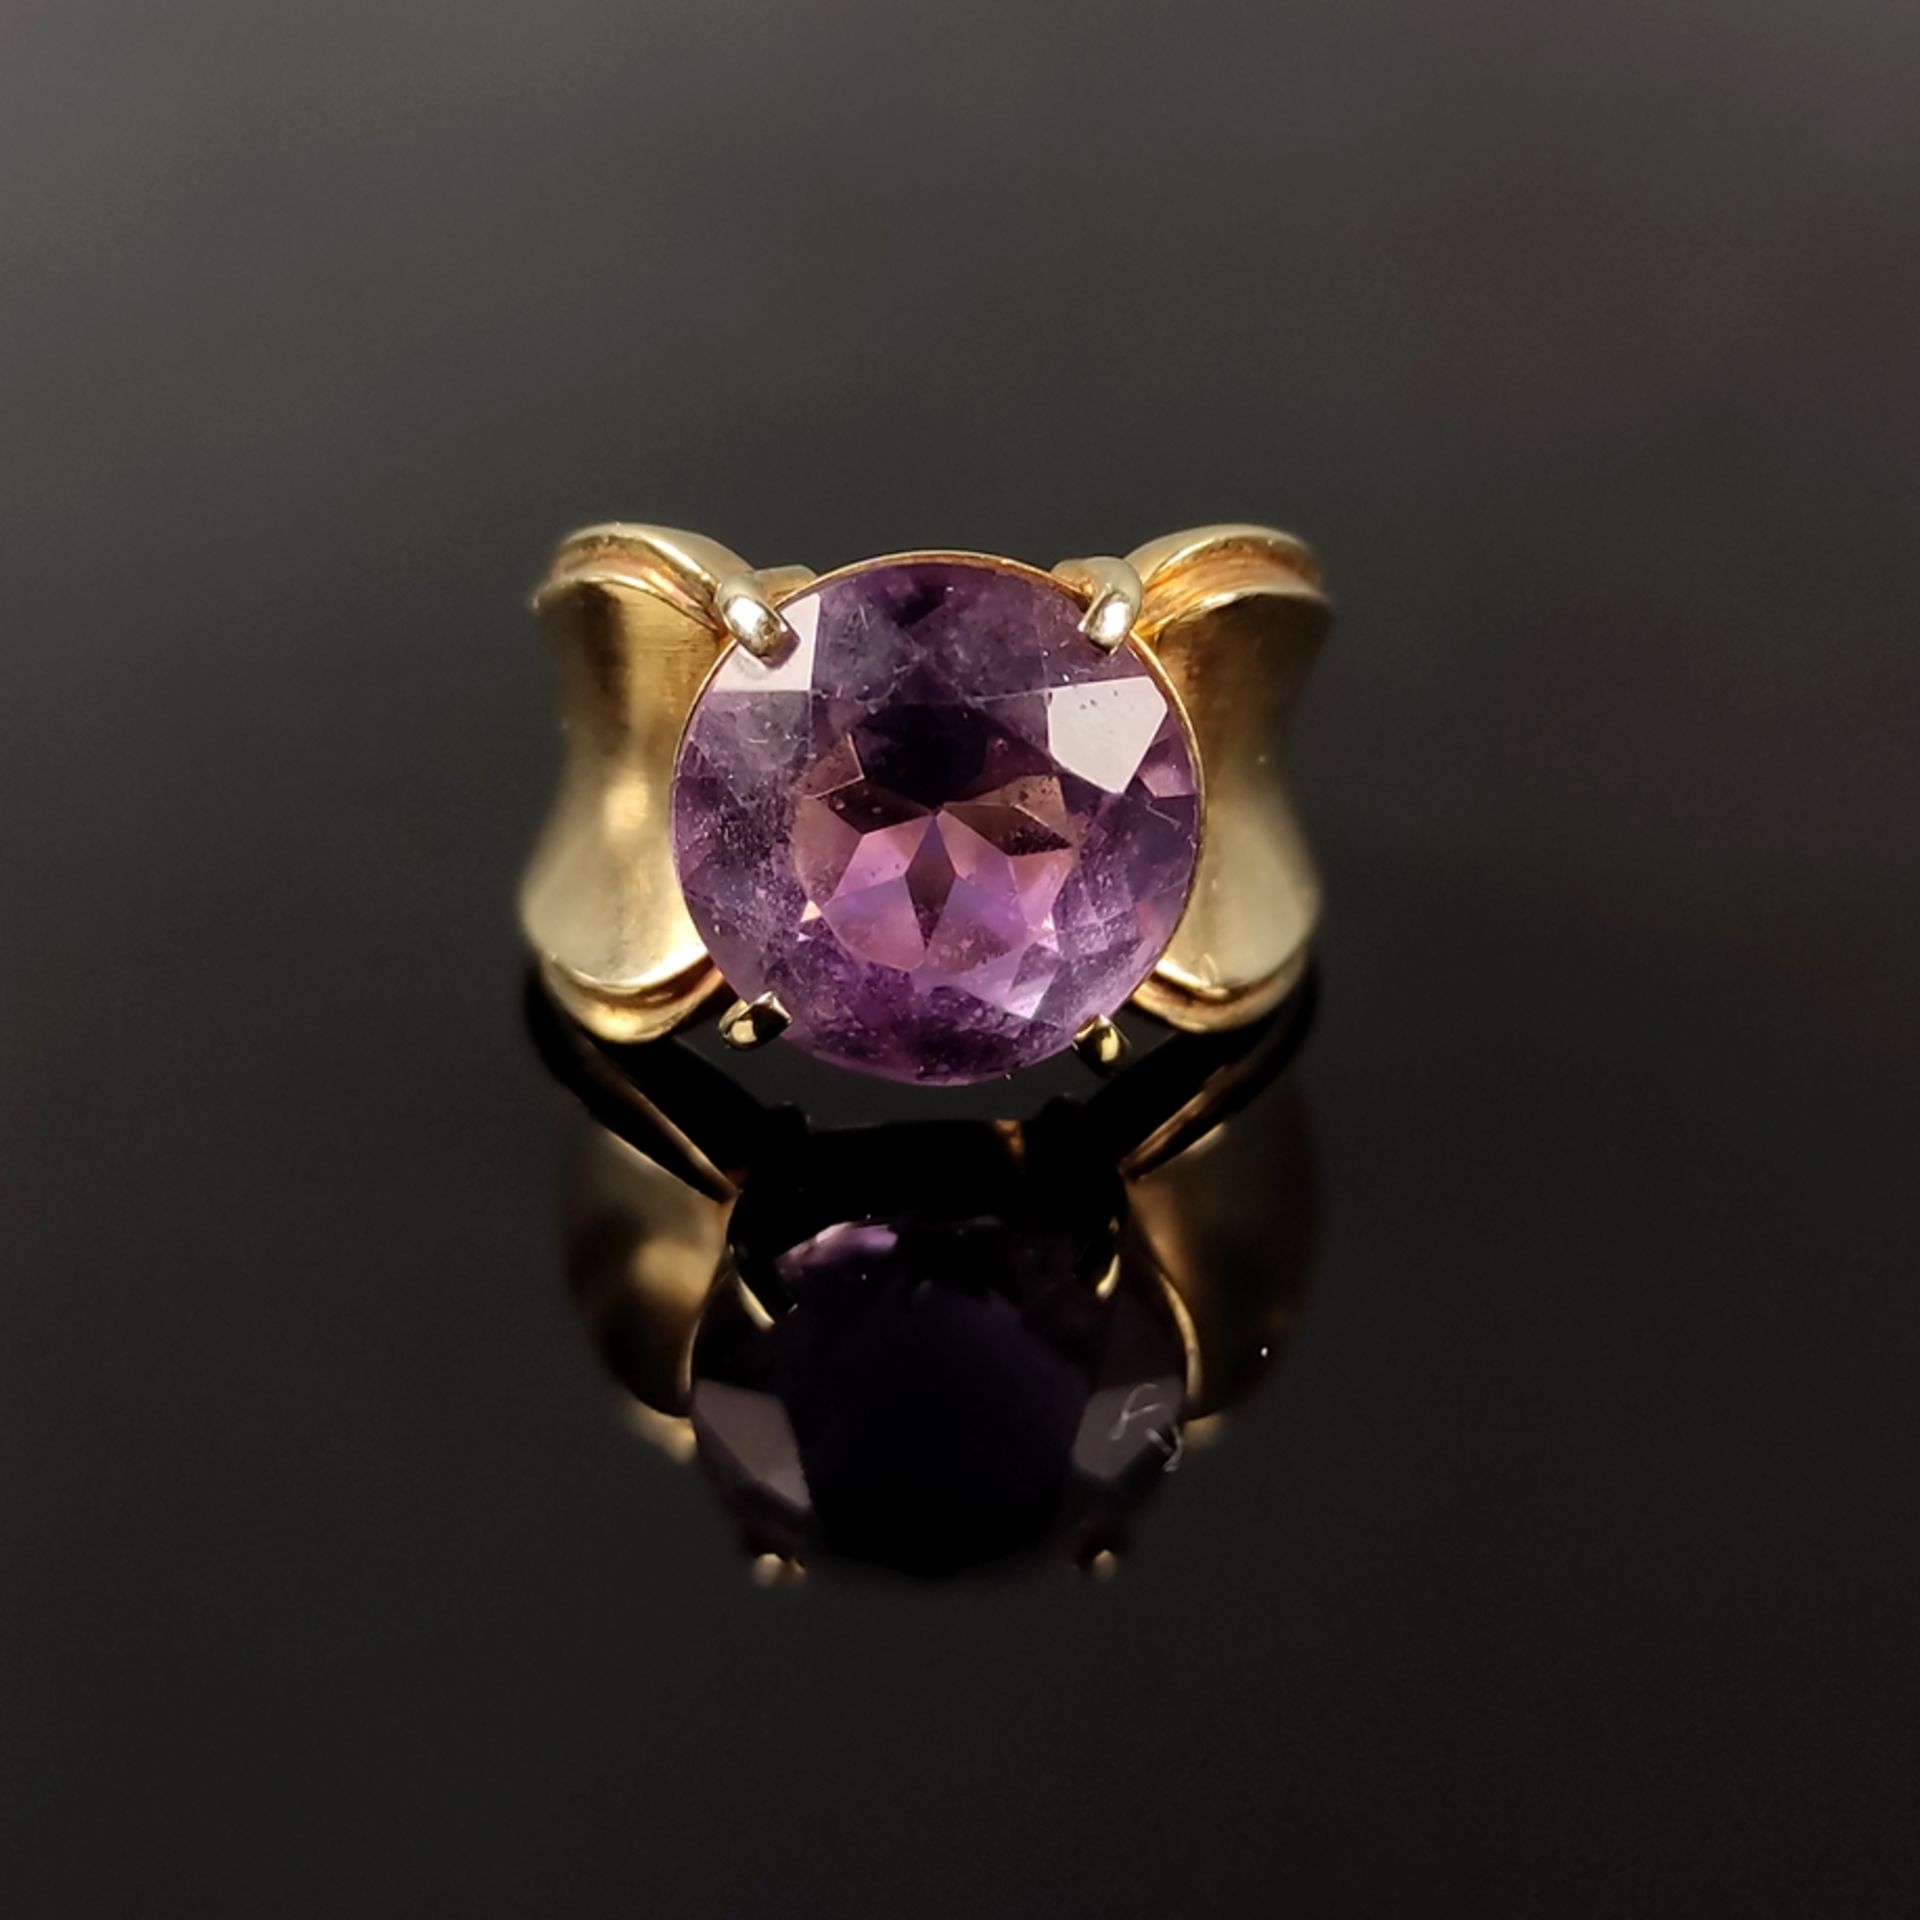 Amethyst ring, 585/14K yellow gold, 10.6g, center large round faceted amethyst (d 12mm), wide sligh - Image 2 of 3